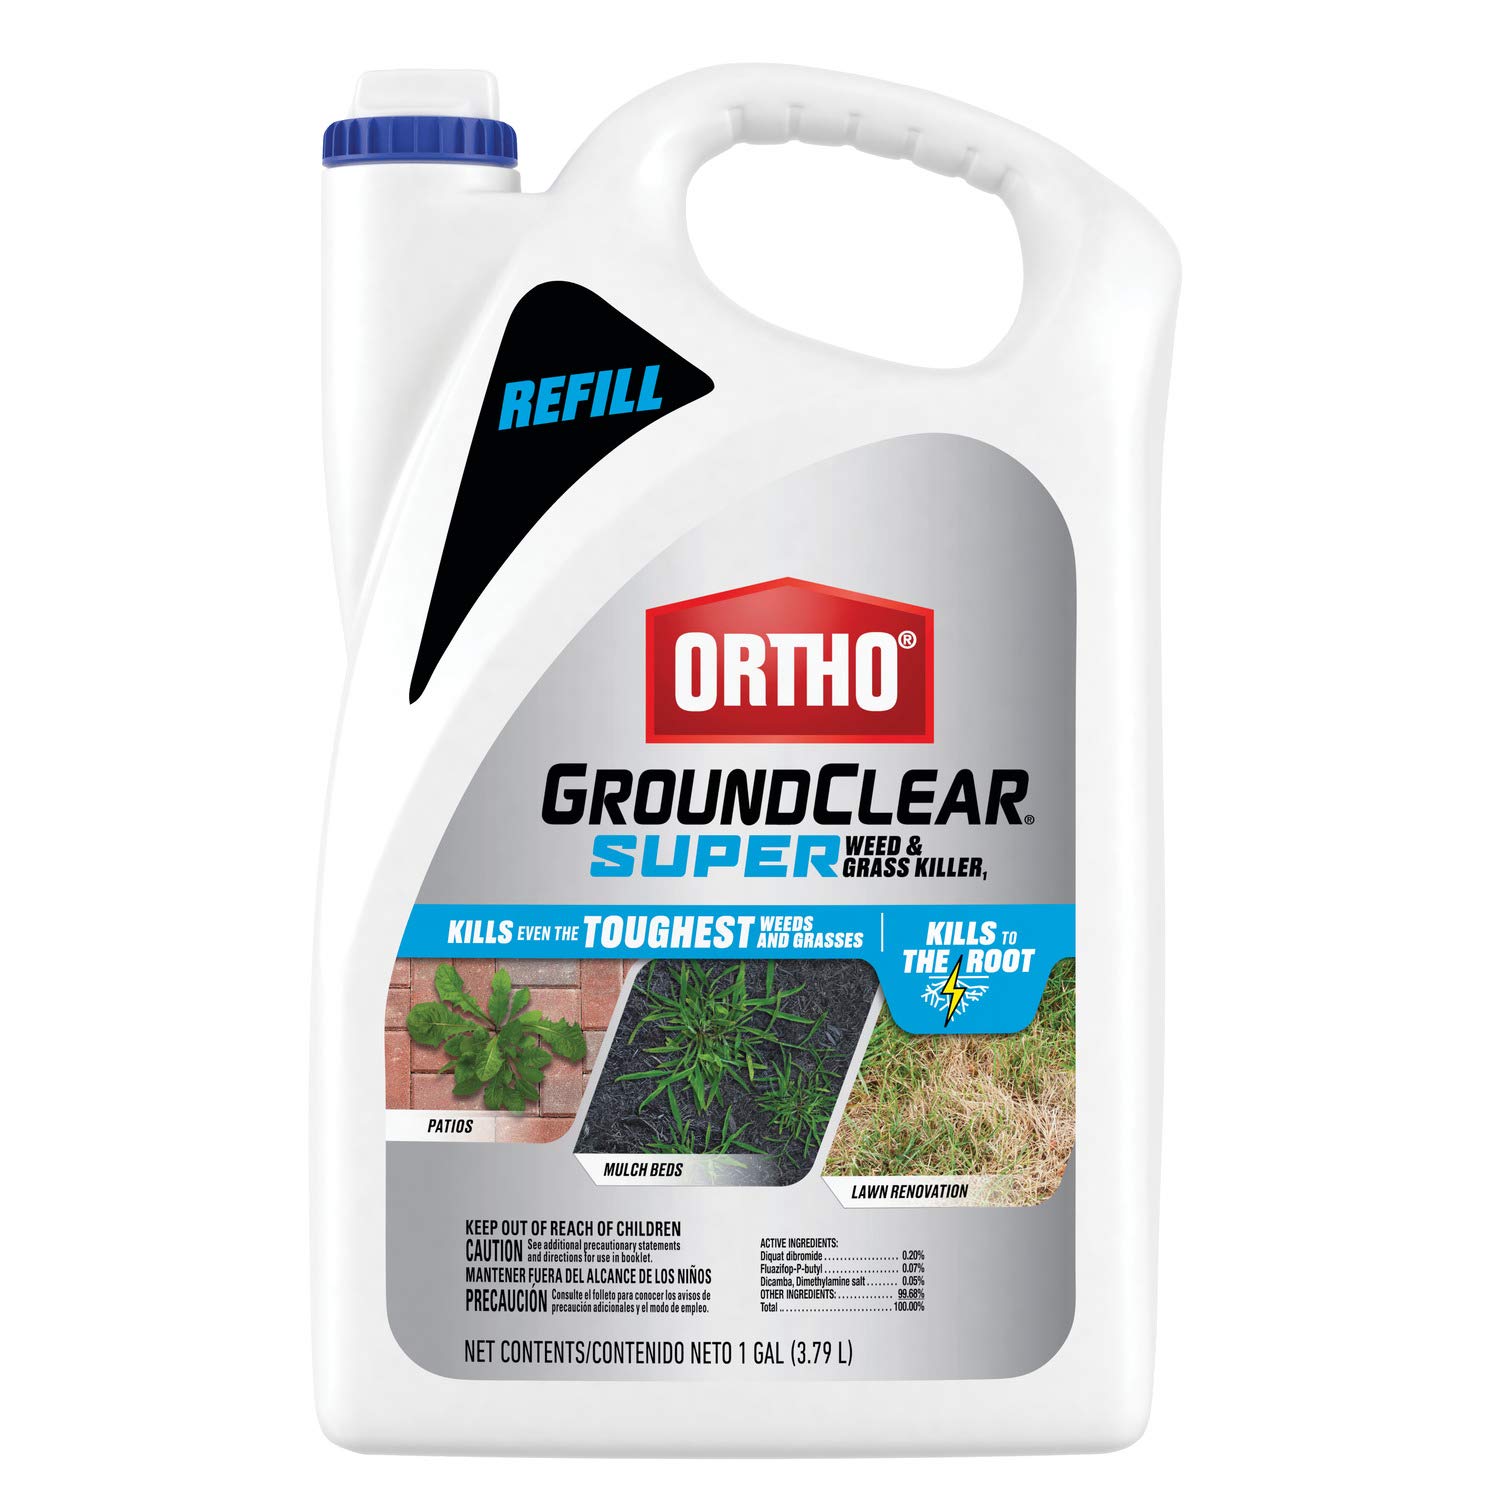 1-Gal Ortho GroundClear Super Weed & Grass Killer Refill $8.97